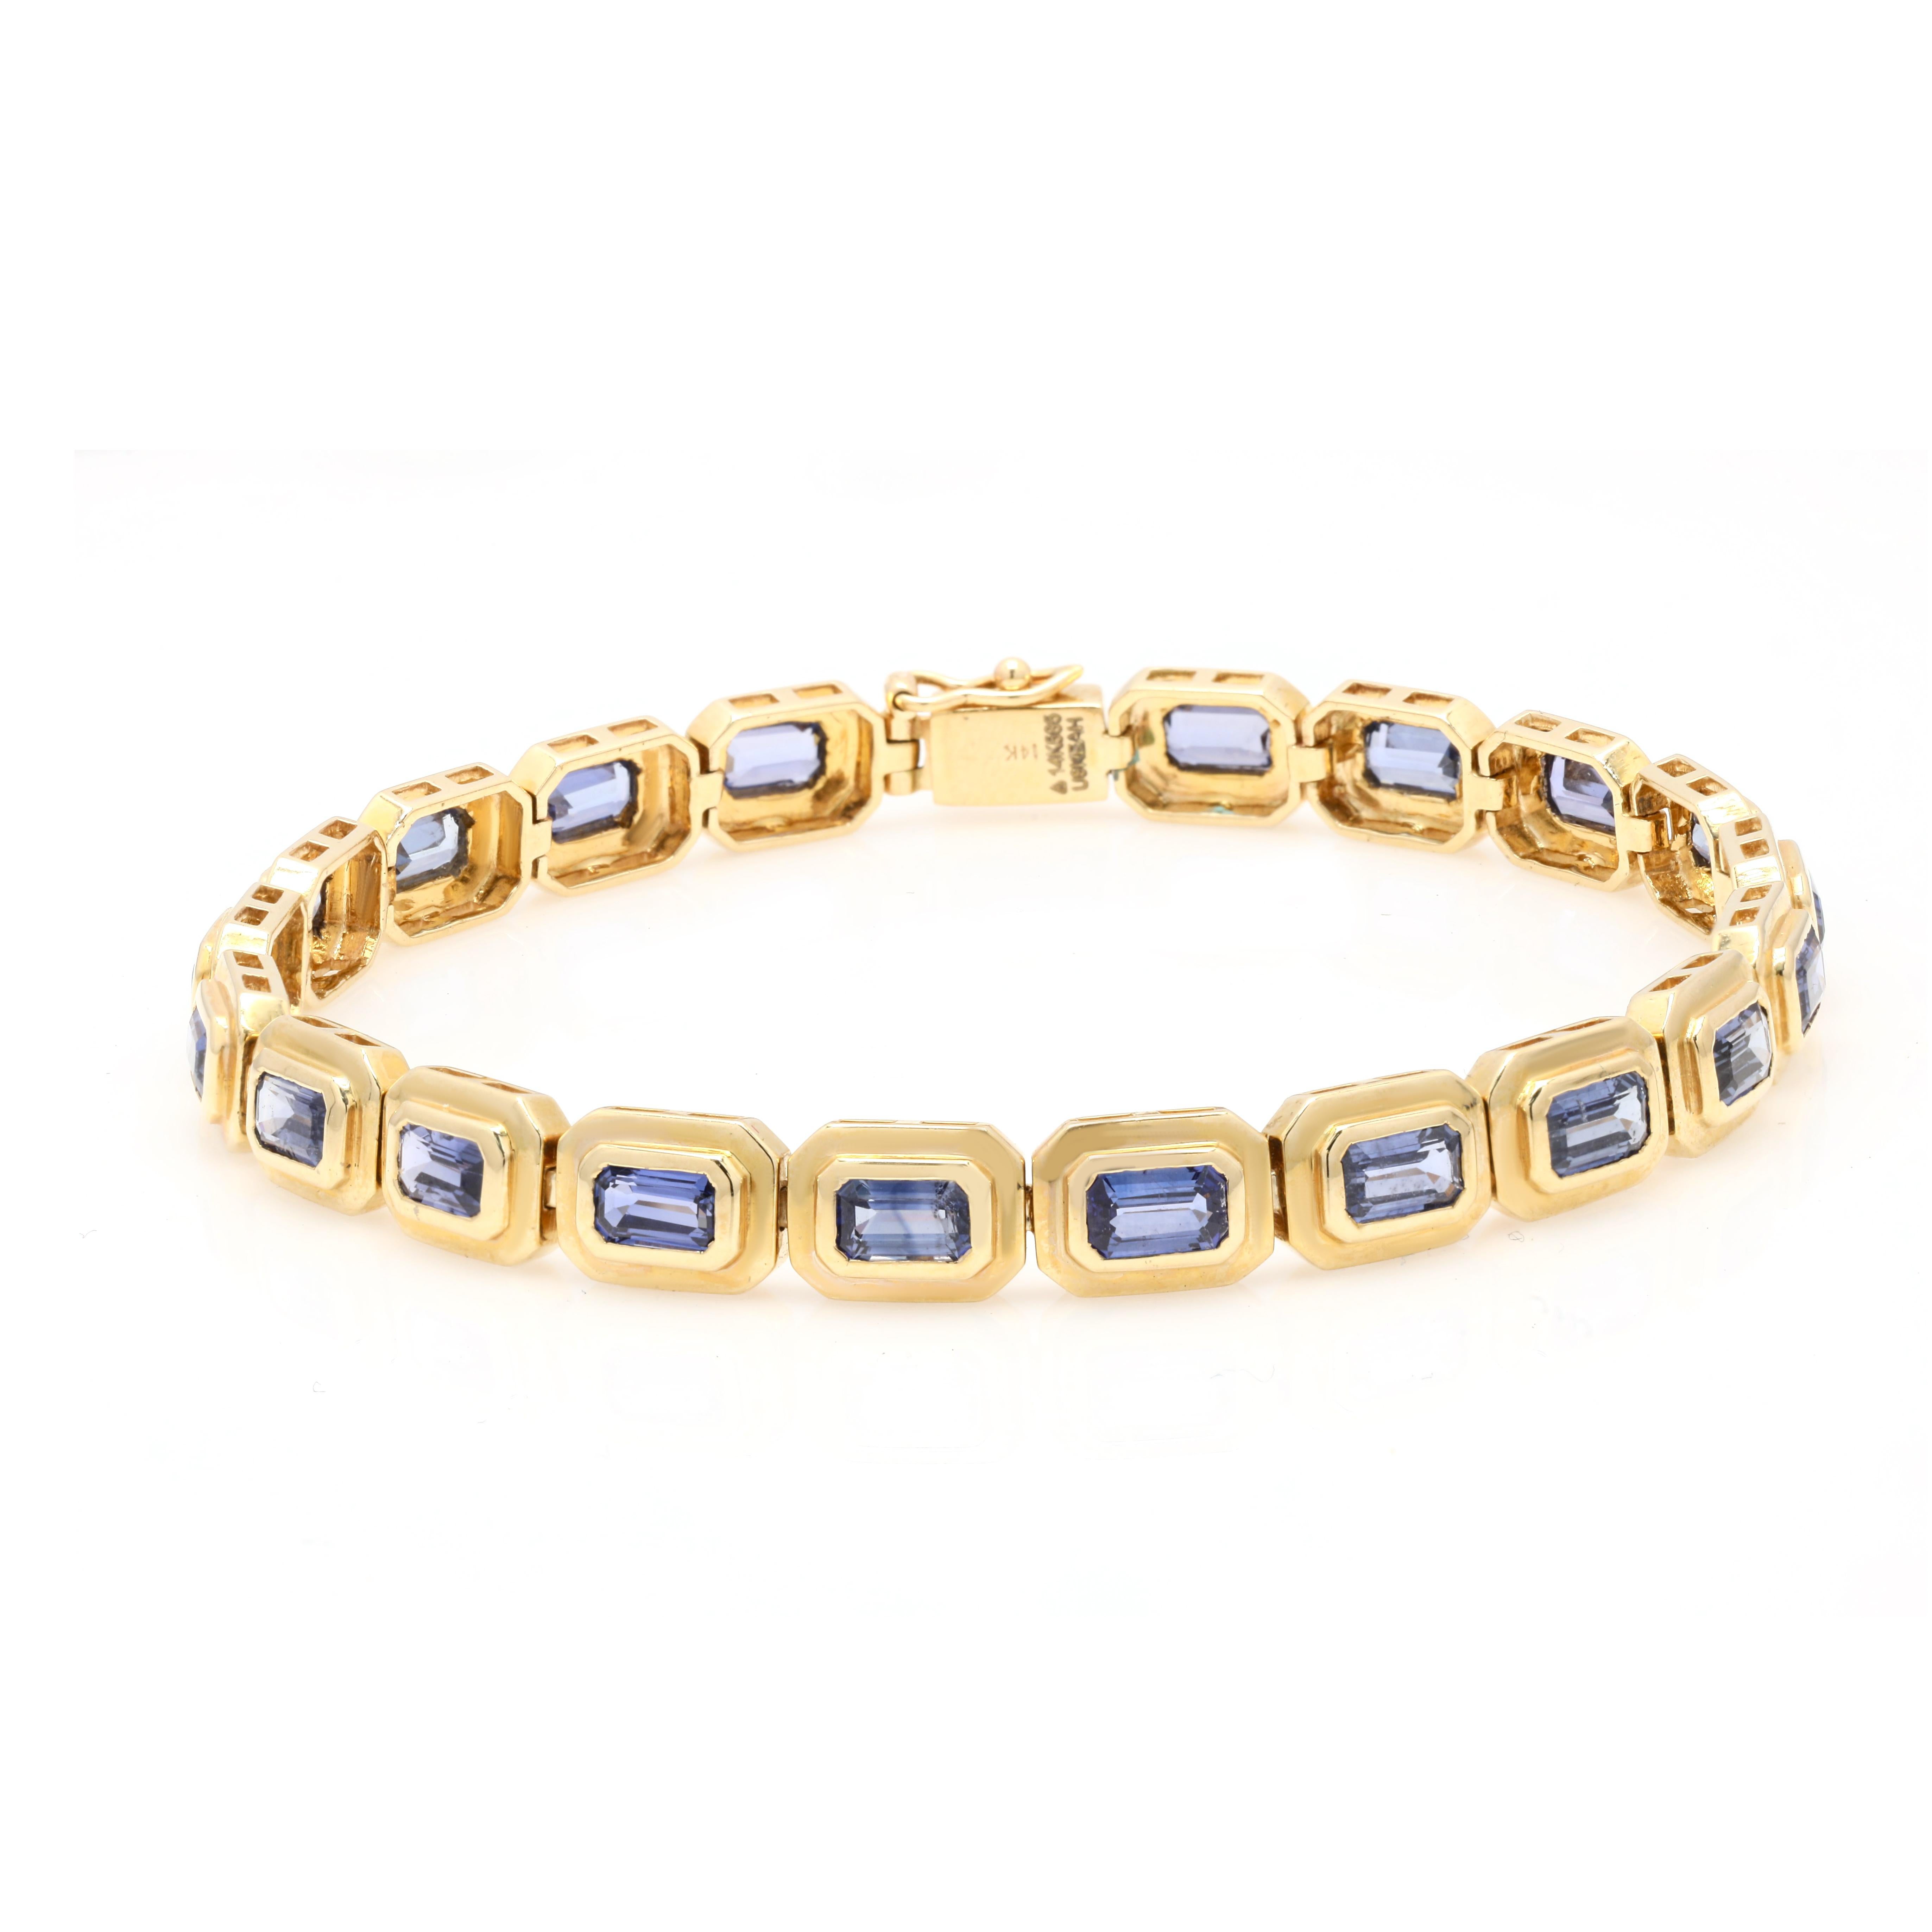 Contemporary 6.01 Carat Genuine Tanzanite Tennis Bracelet in Solid 14K Yellow Gold For Sale